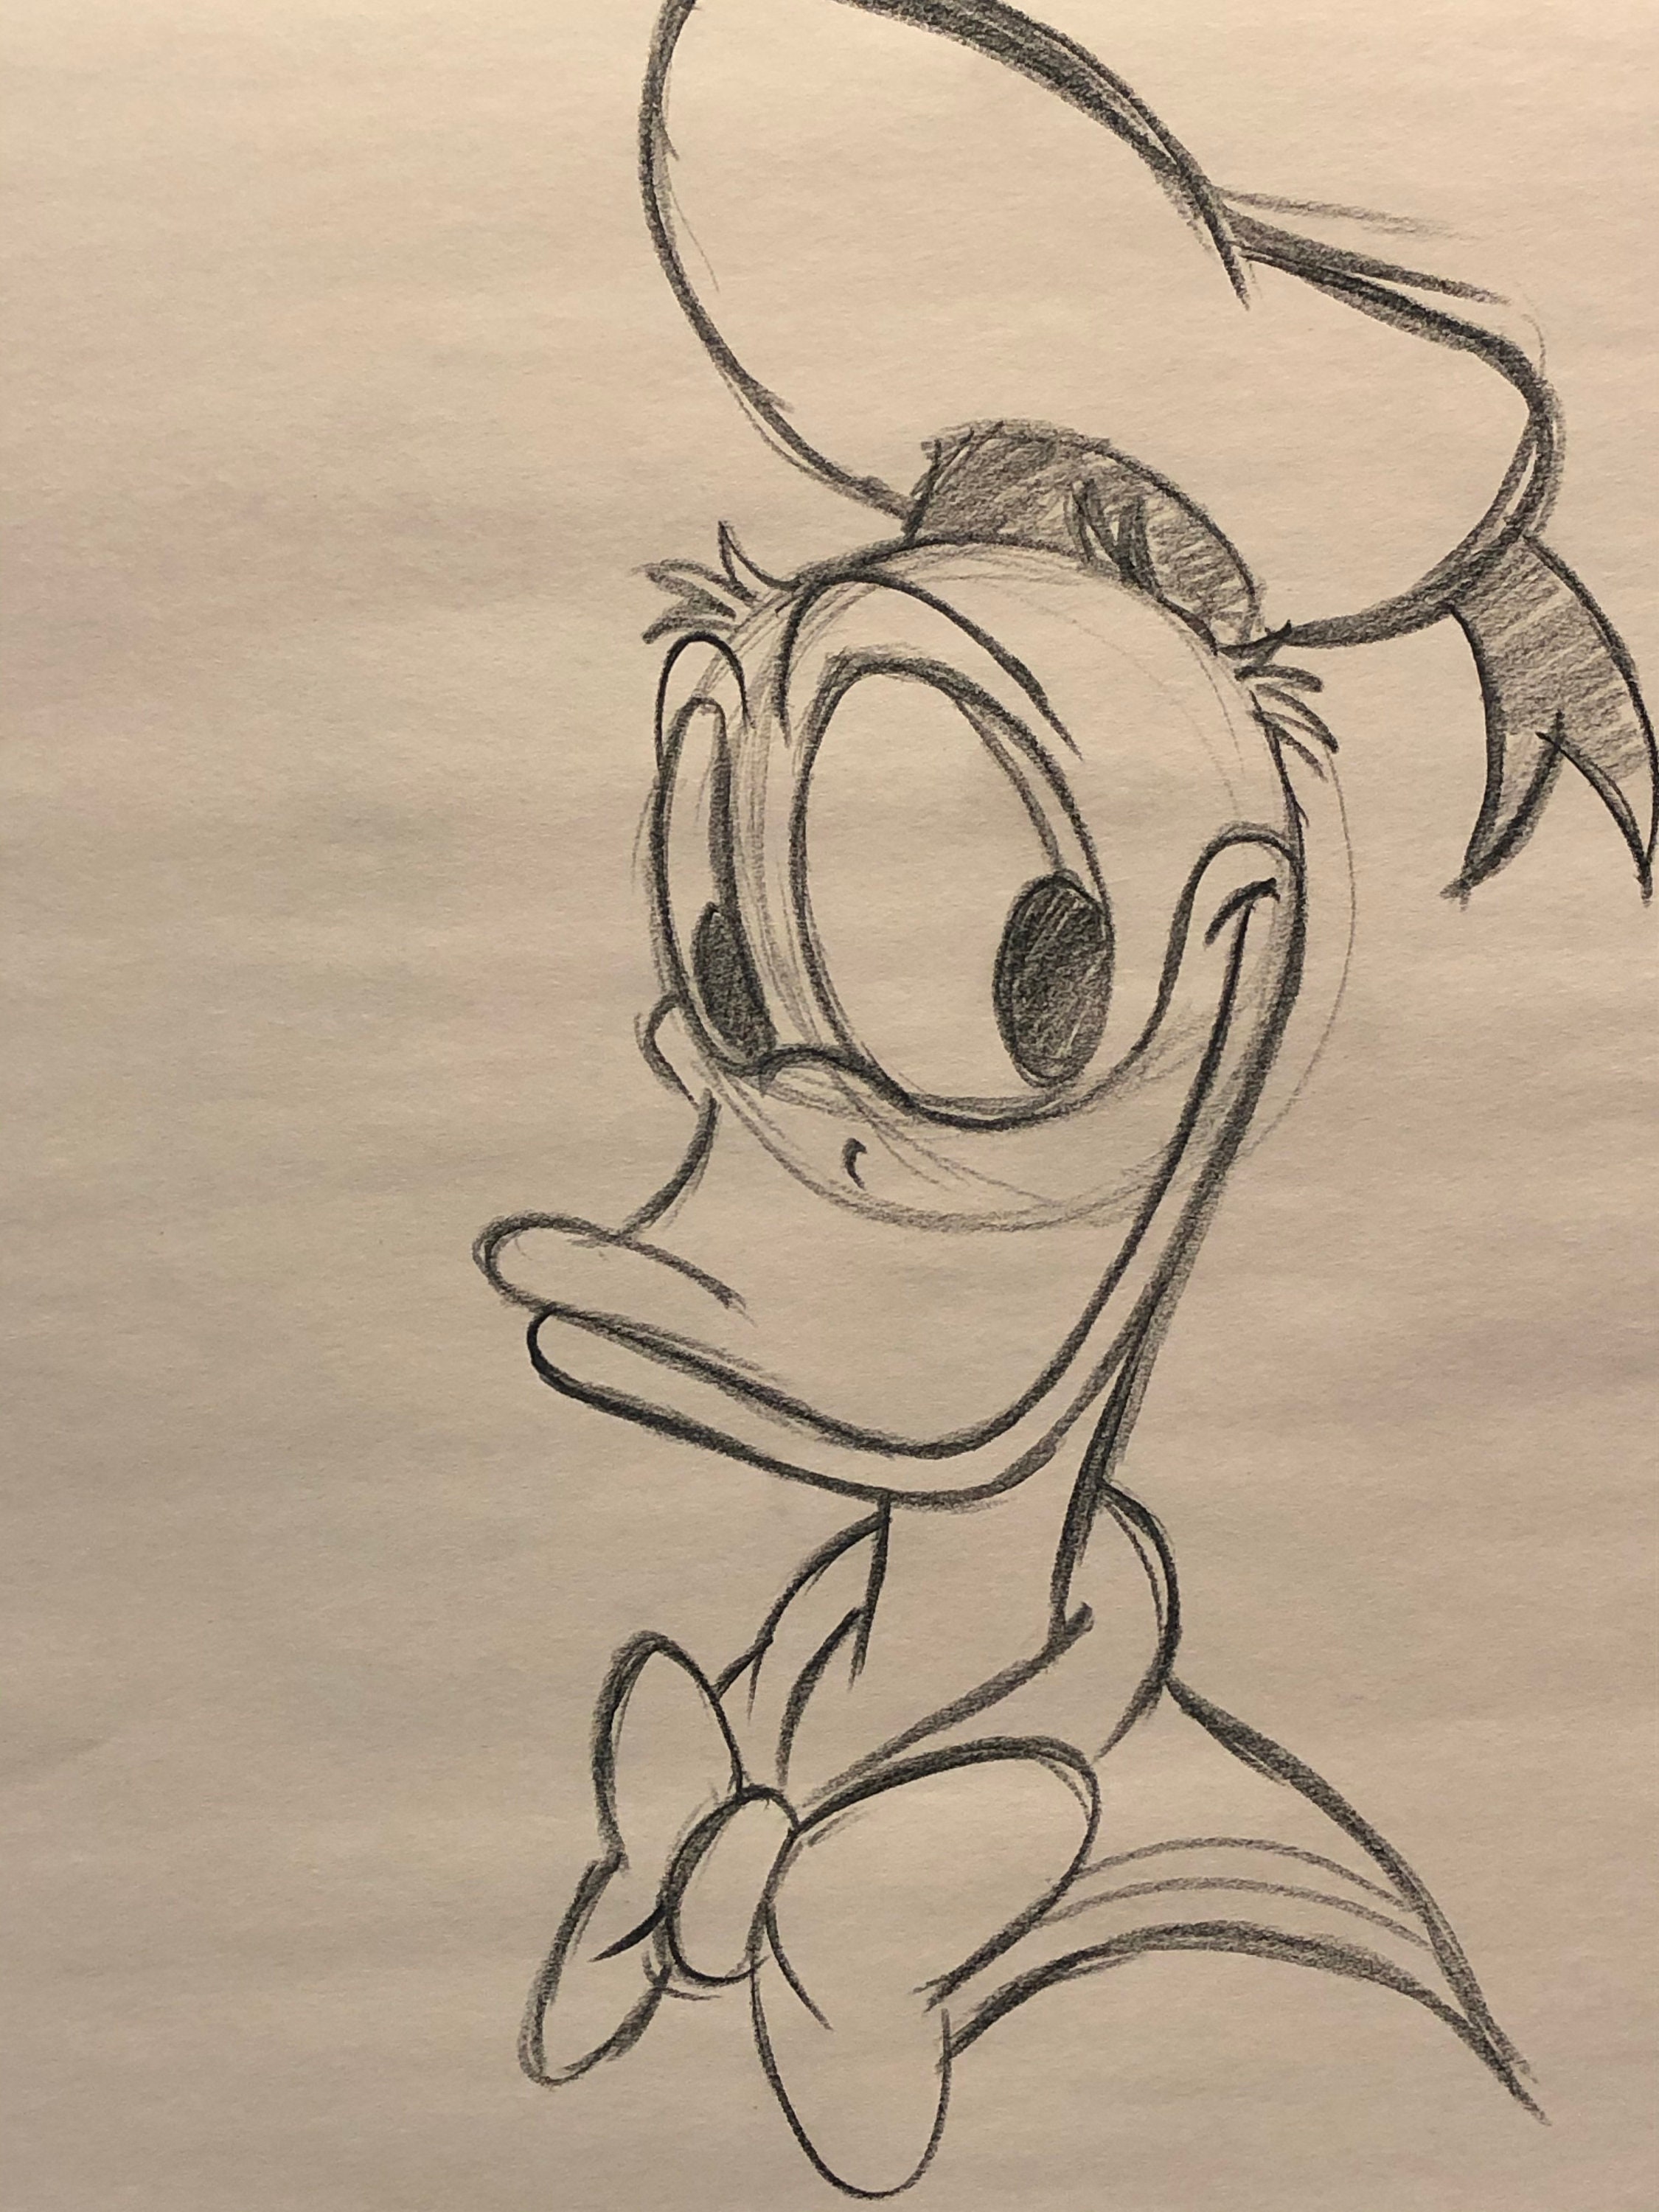 Donald the Duck Original Art 8.5x11 Sketch - Created by Guy Gilchrist – Guy  Gilchrist | Official Website | Autograph Funko POP | Jim Henson's Cartoonist